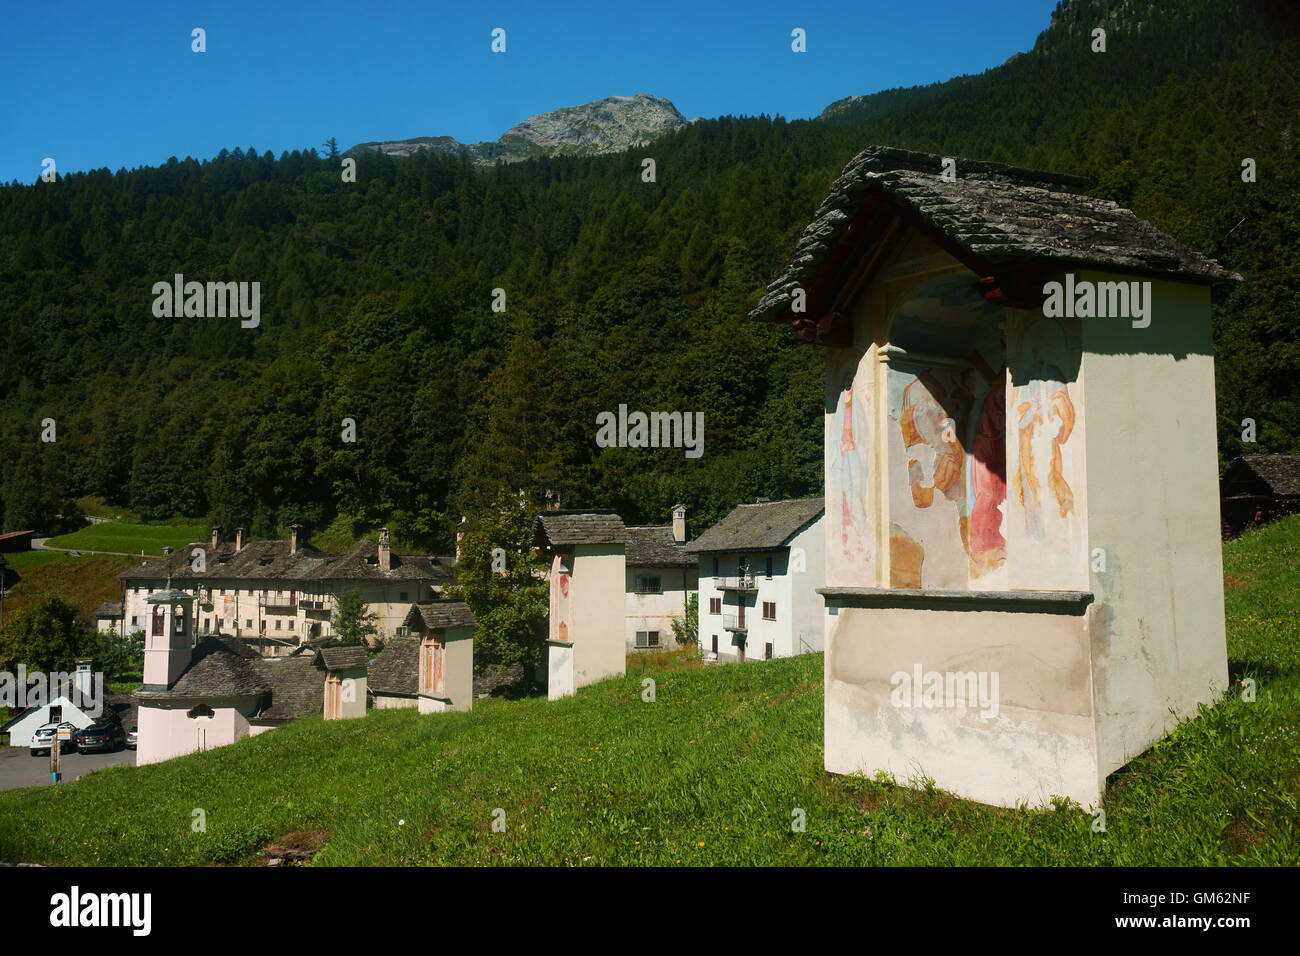 Town Campo with religious stations of the cross chapels, Valle di Campo, Ticino, Switzerland Stock Photo